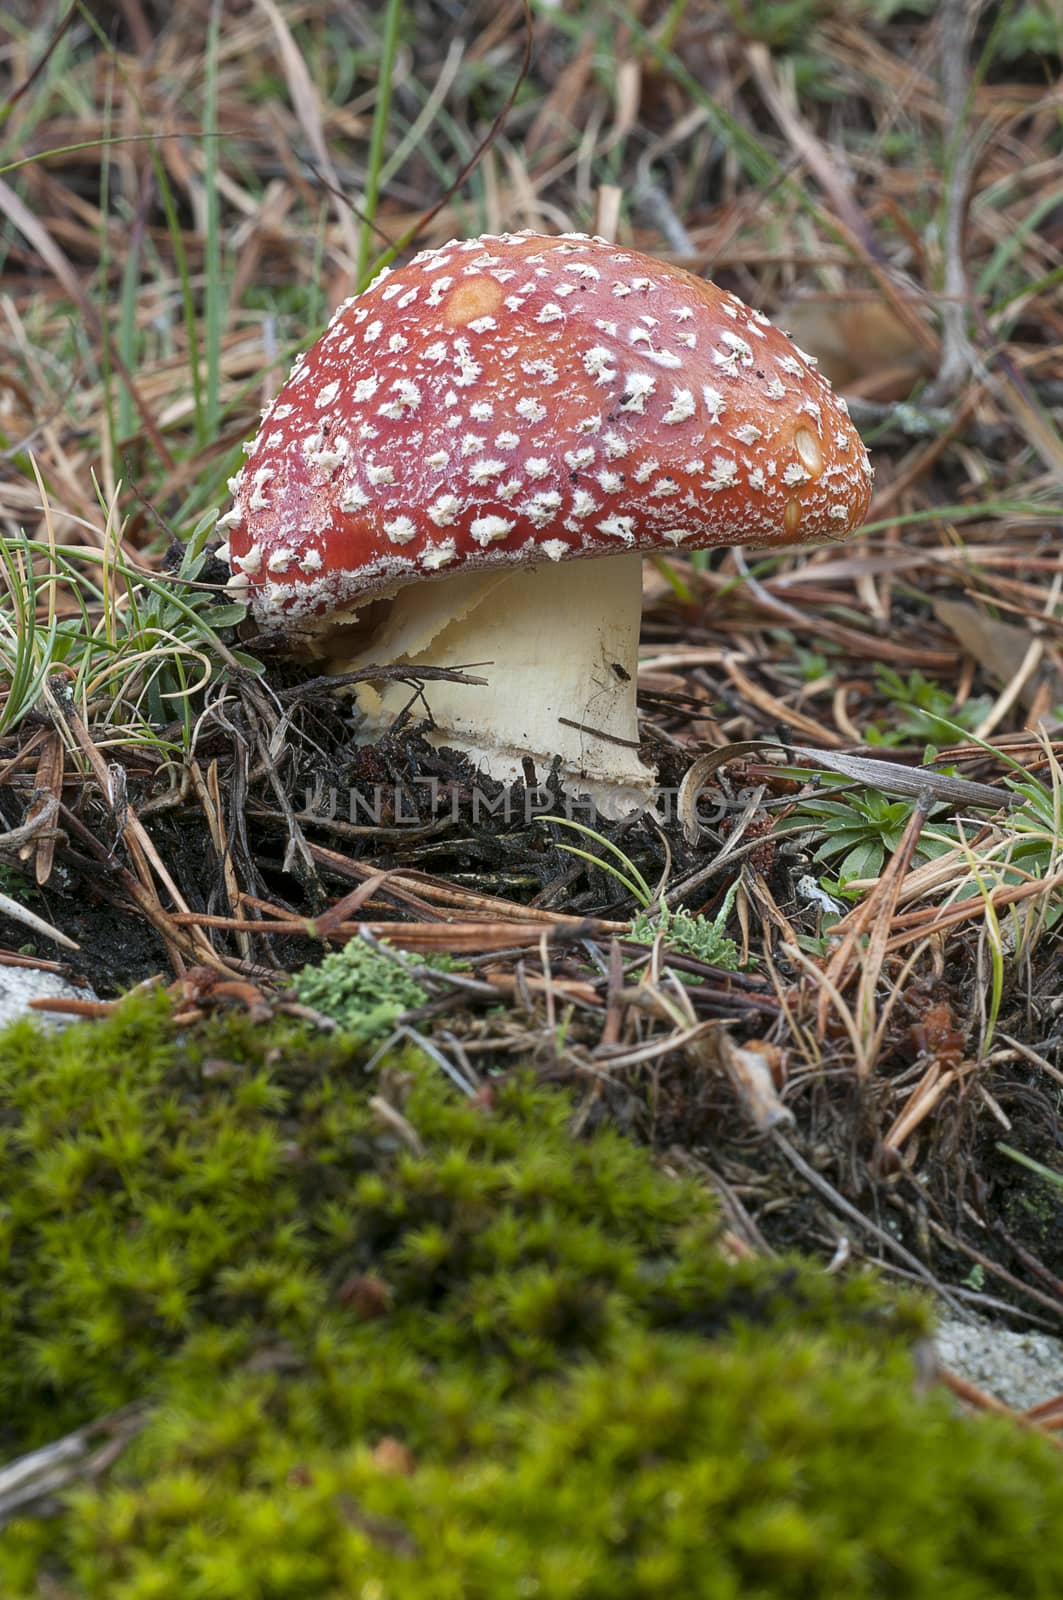 Amanita muscaria, mushroom in the forest by jalonsohu@gmail.com